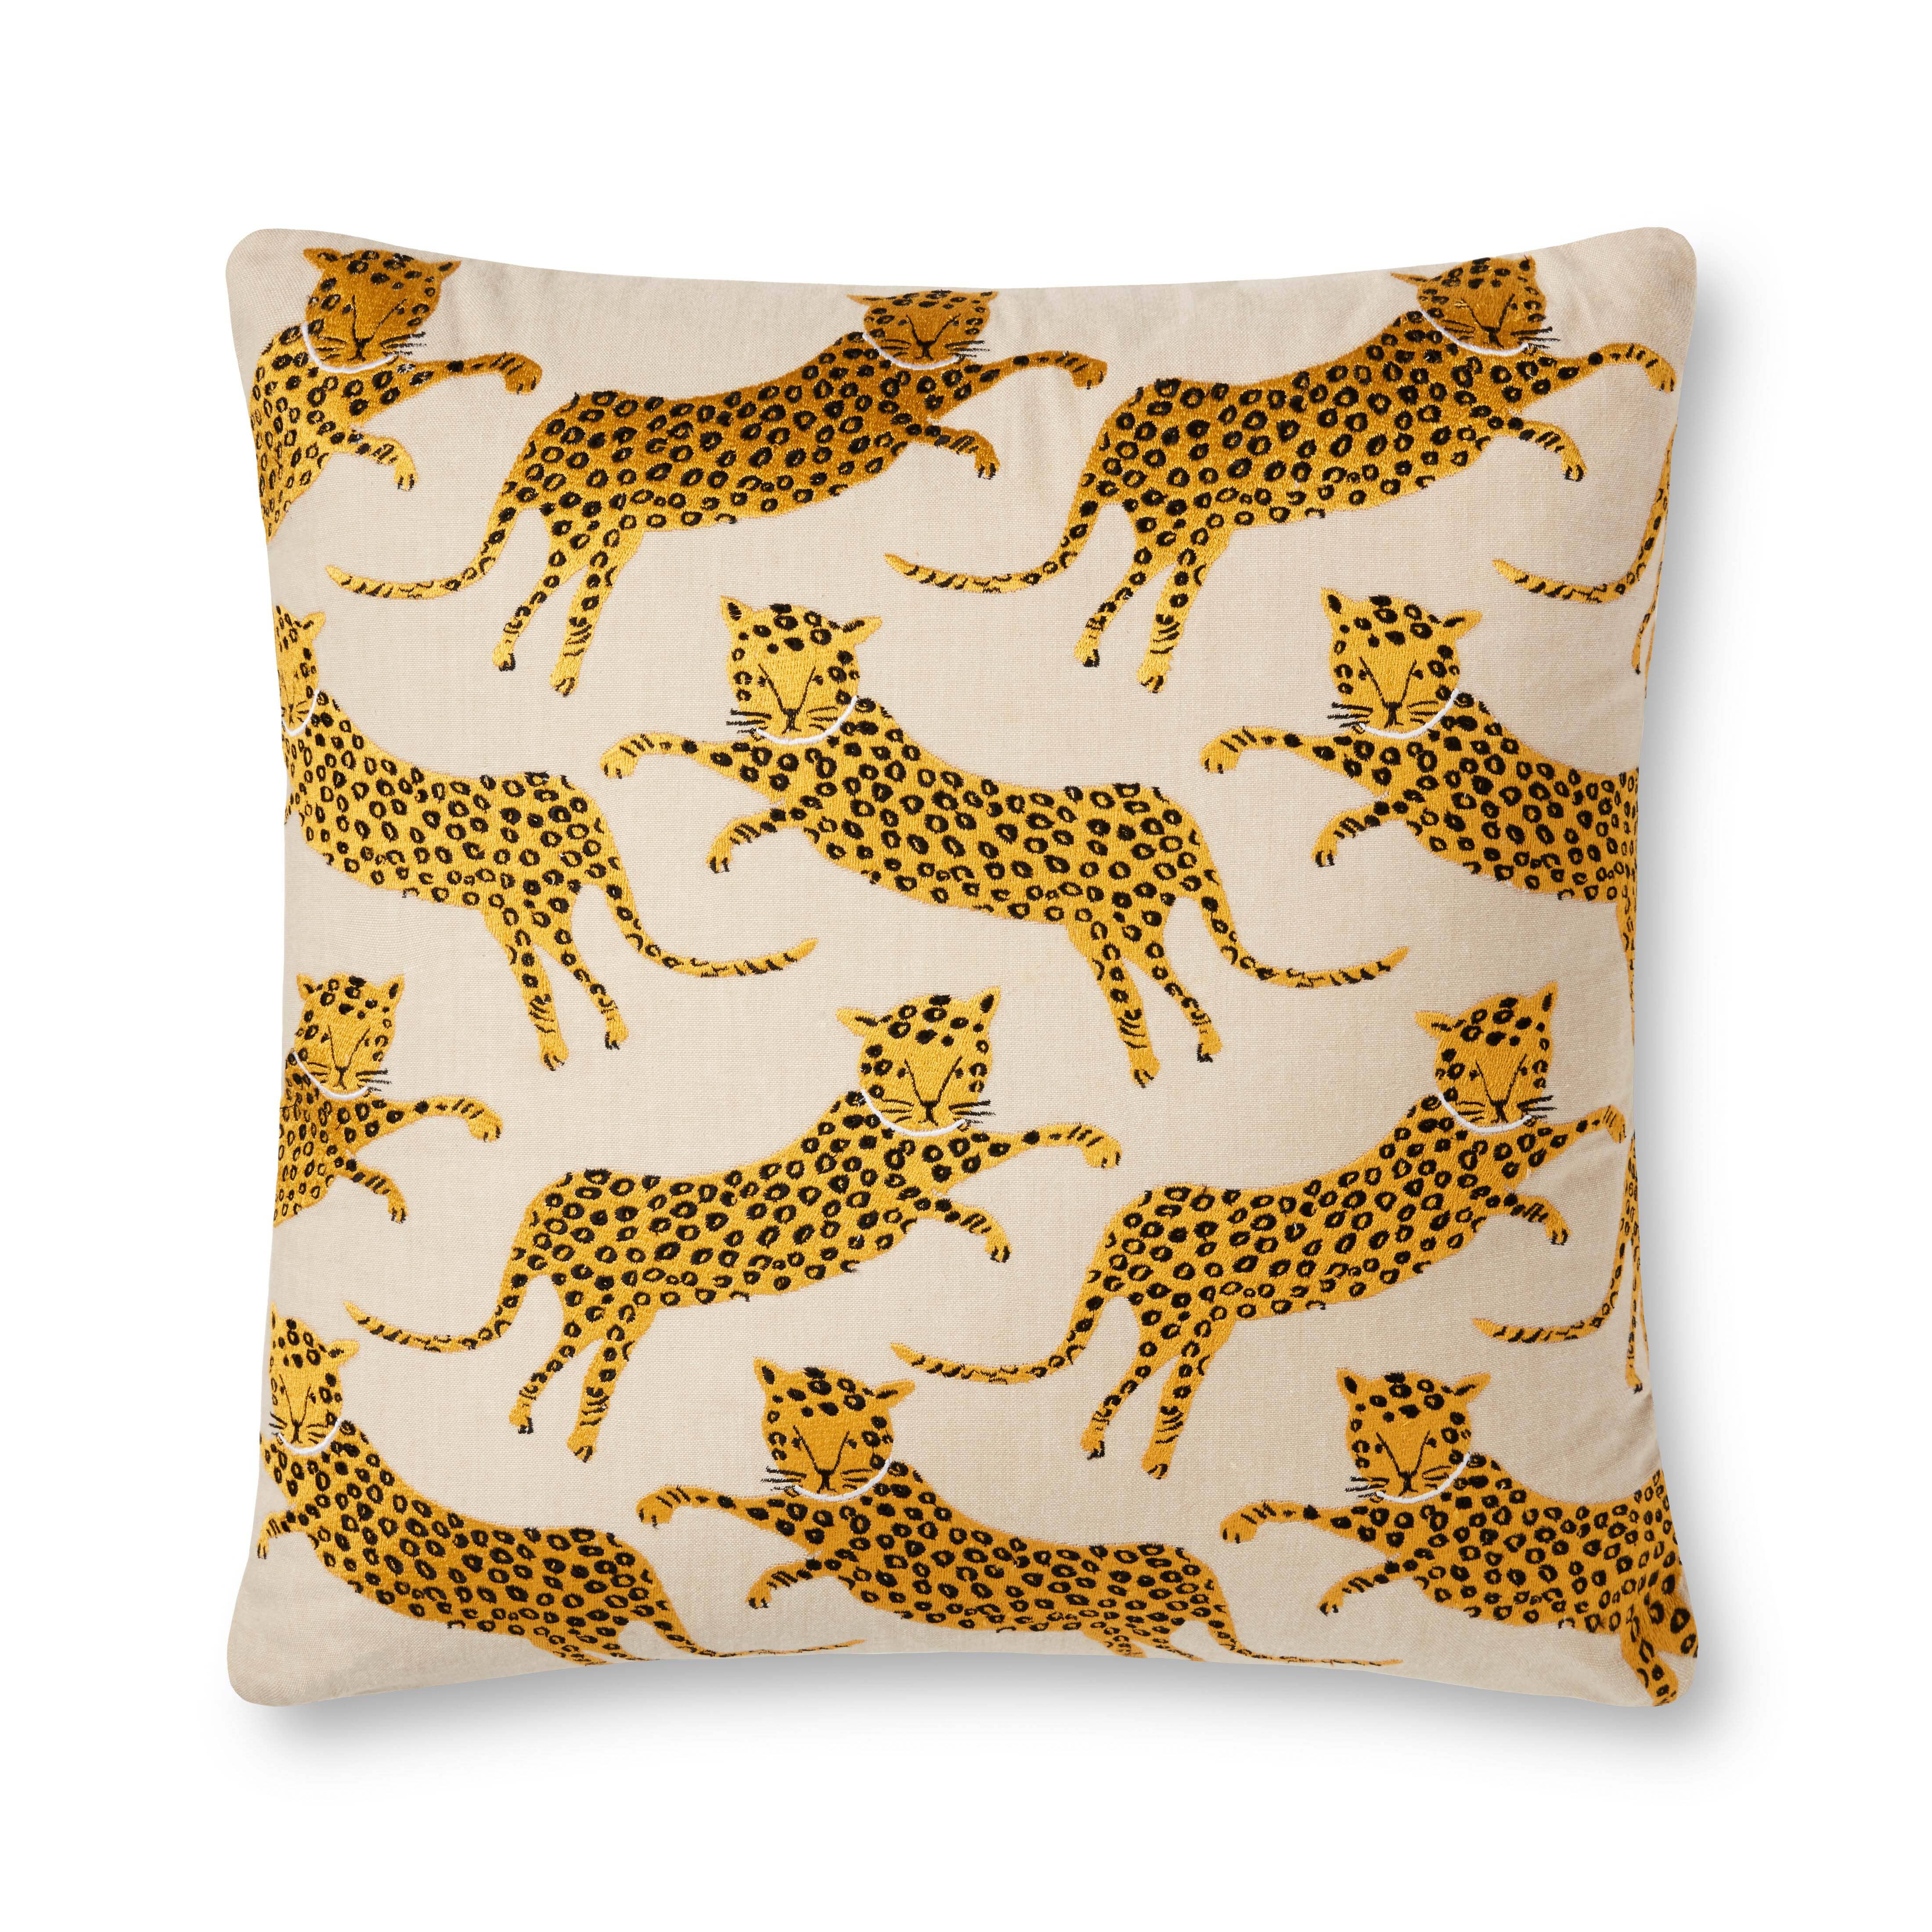 Rifle Paper Co. x Loloi Pillow | Leap of Leopards Embroidered Pillow